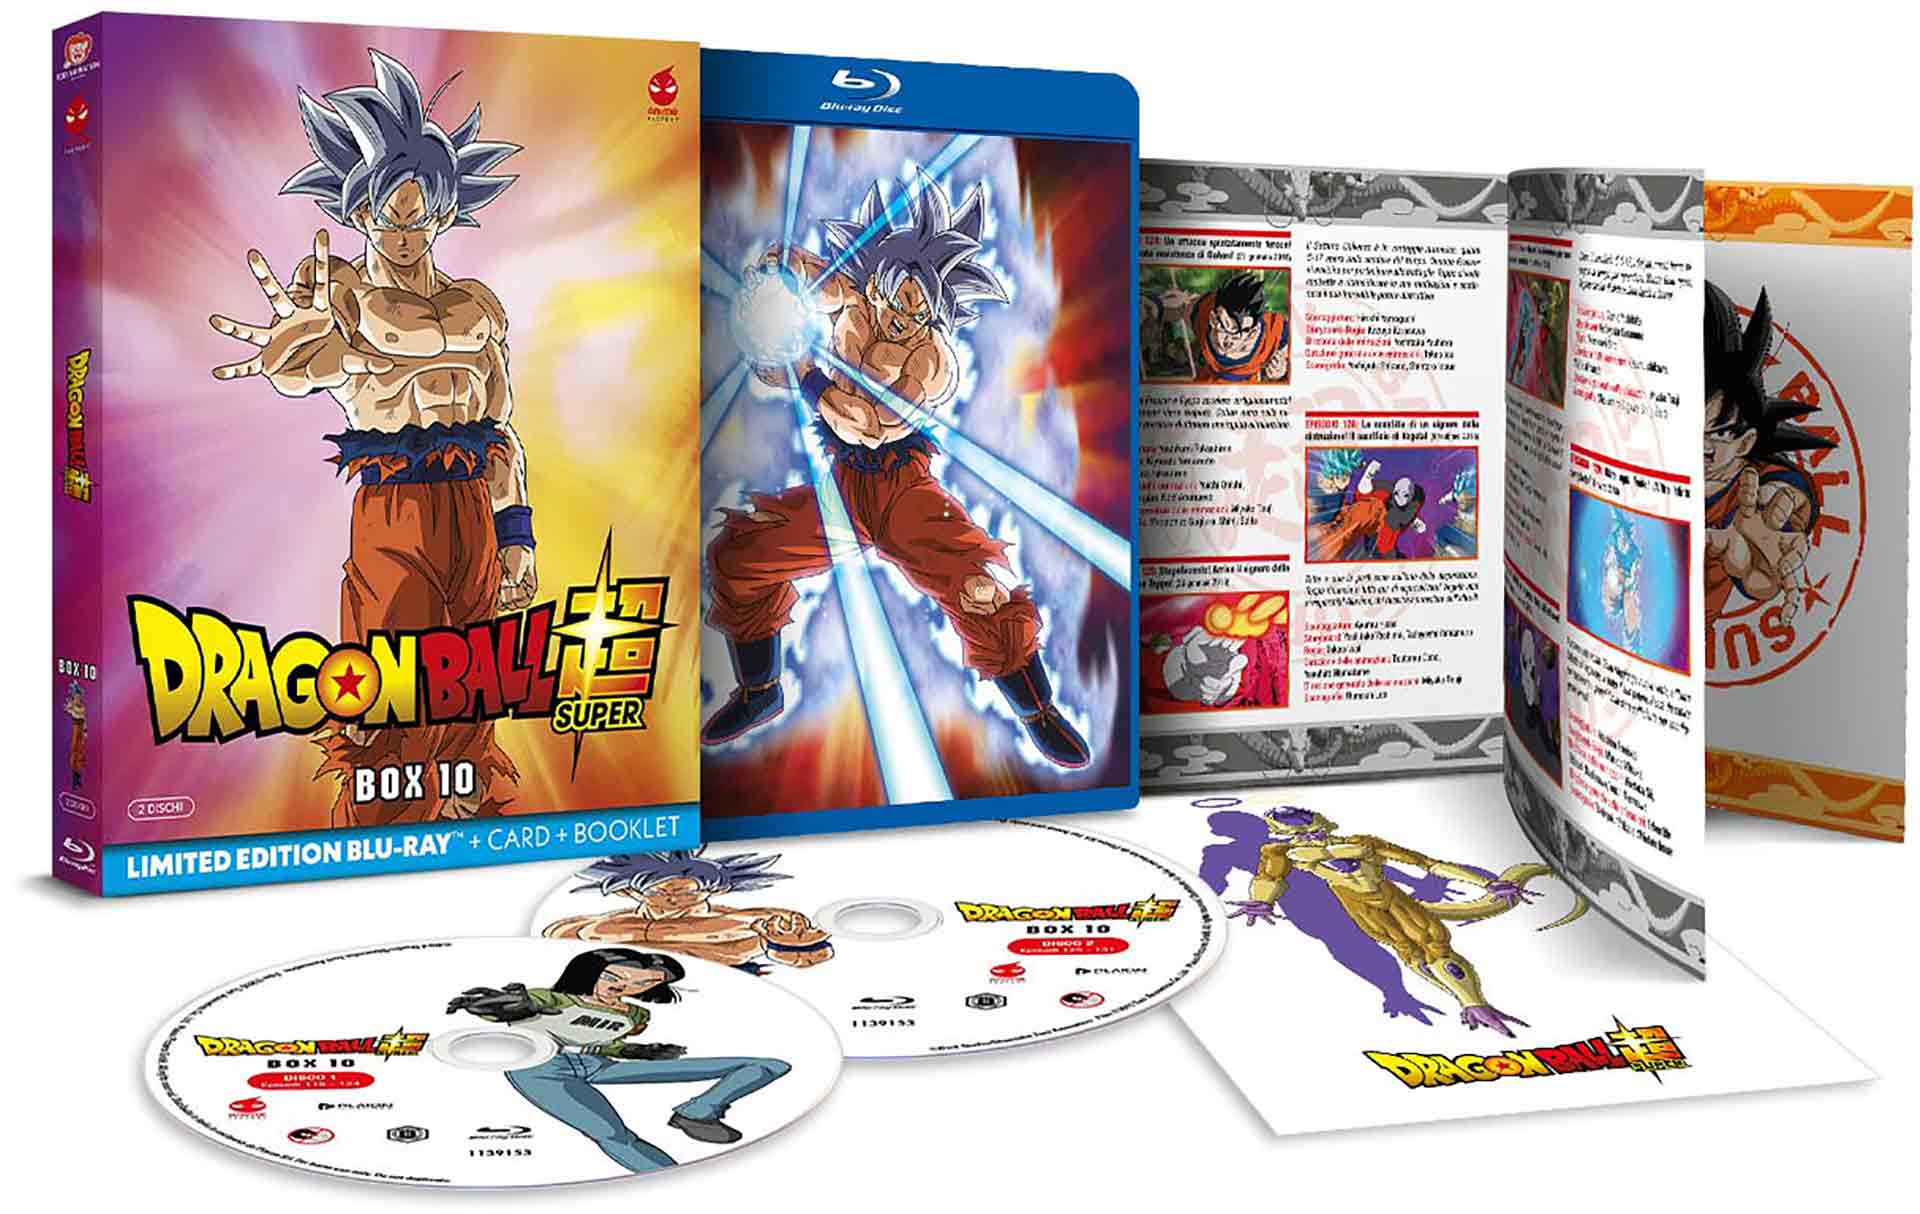 Dragon Ball Super - Volume 10 - Limited Edition Anime Factory 2 Blu-ray + Card + Booklet (Blu-ray) Image 2